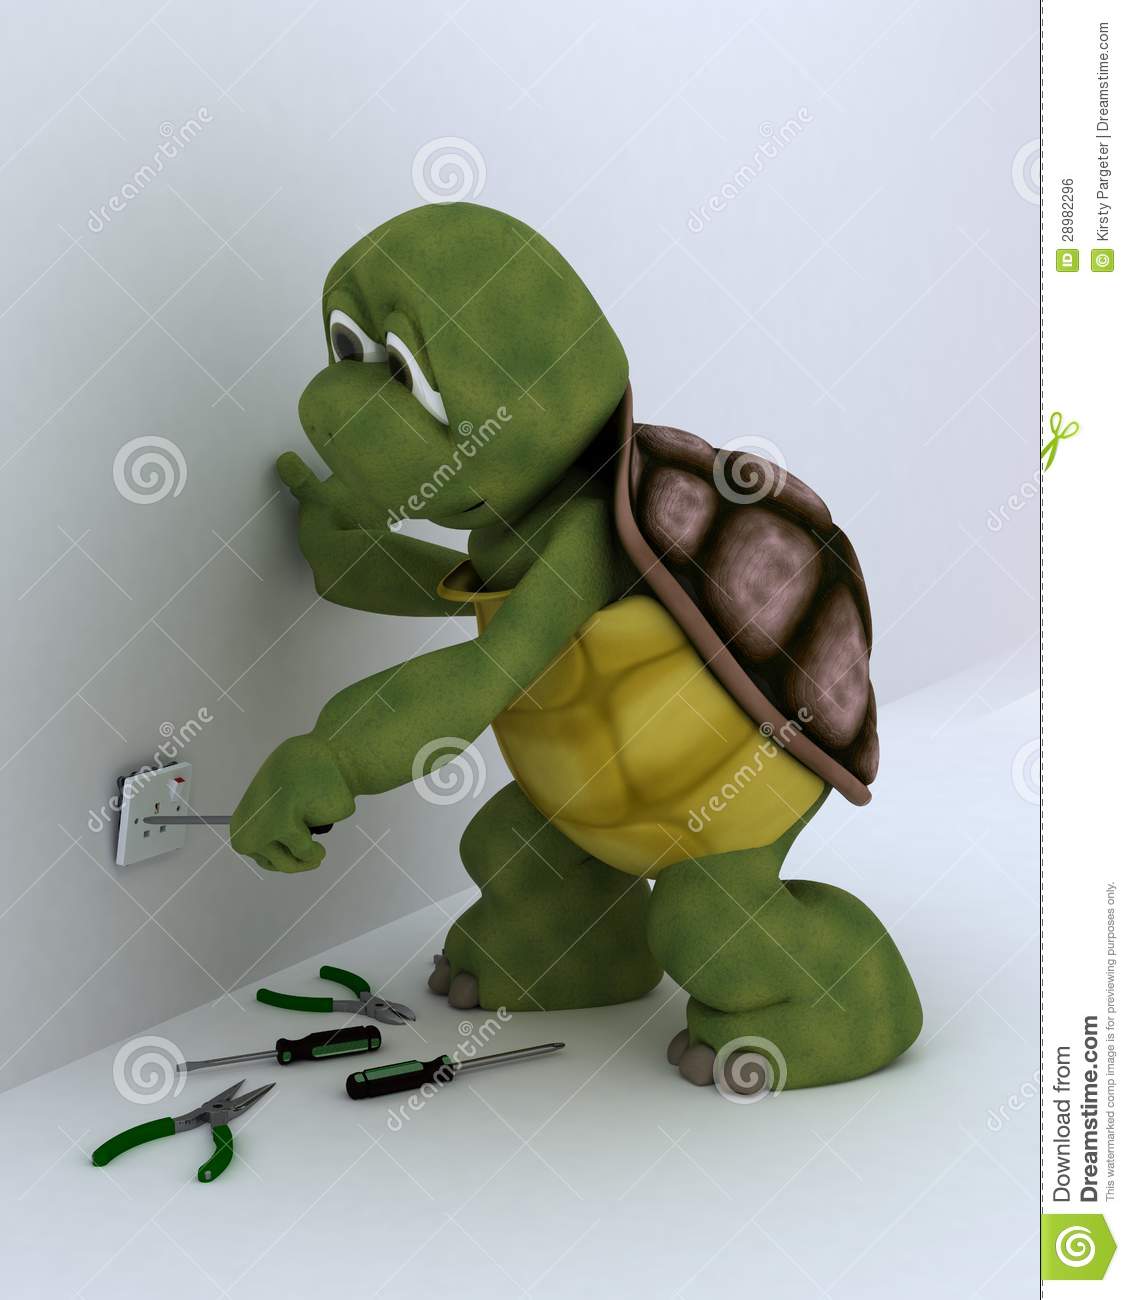 Tortoise Electrical Contractor Royalty Free Stock Image   Image